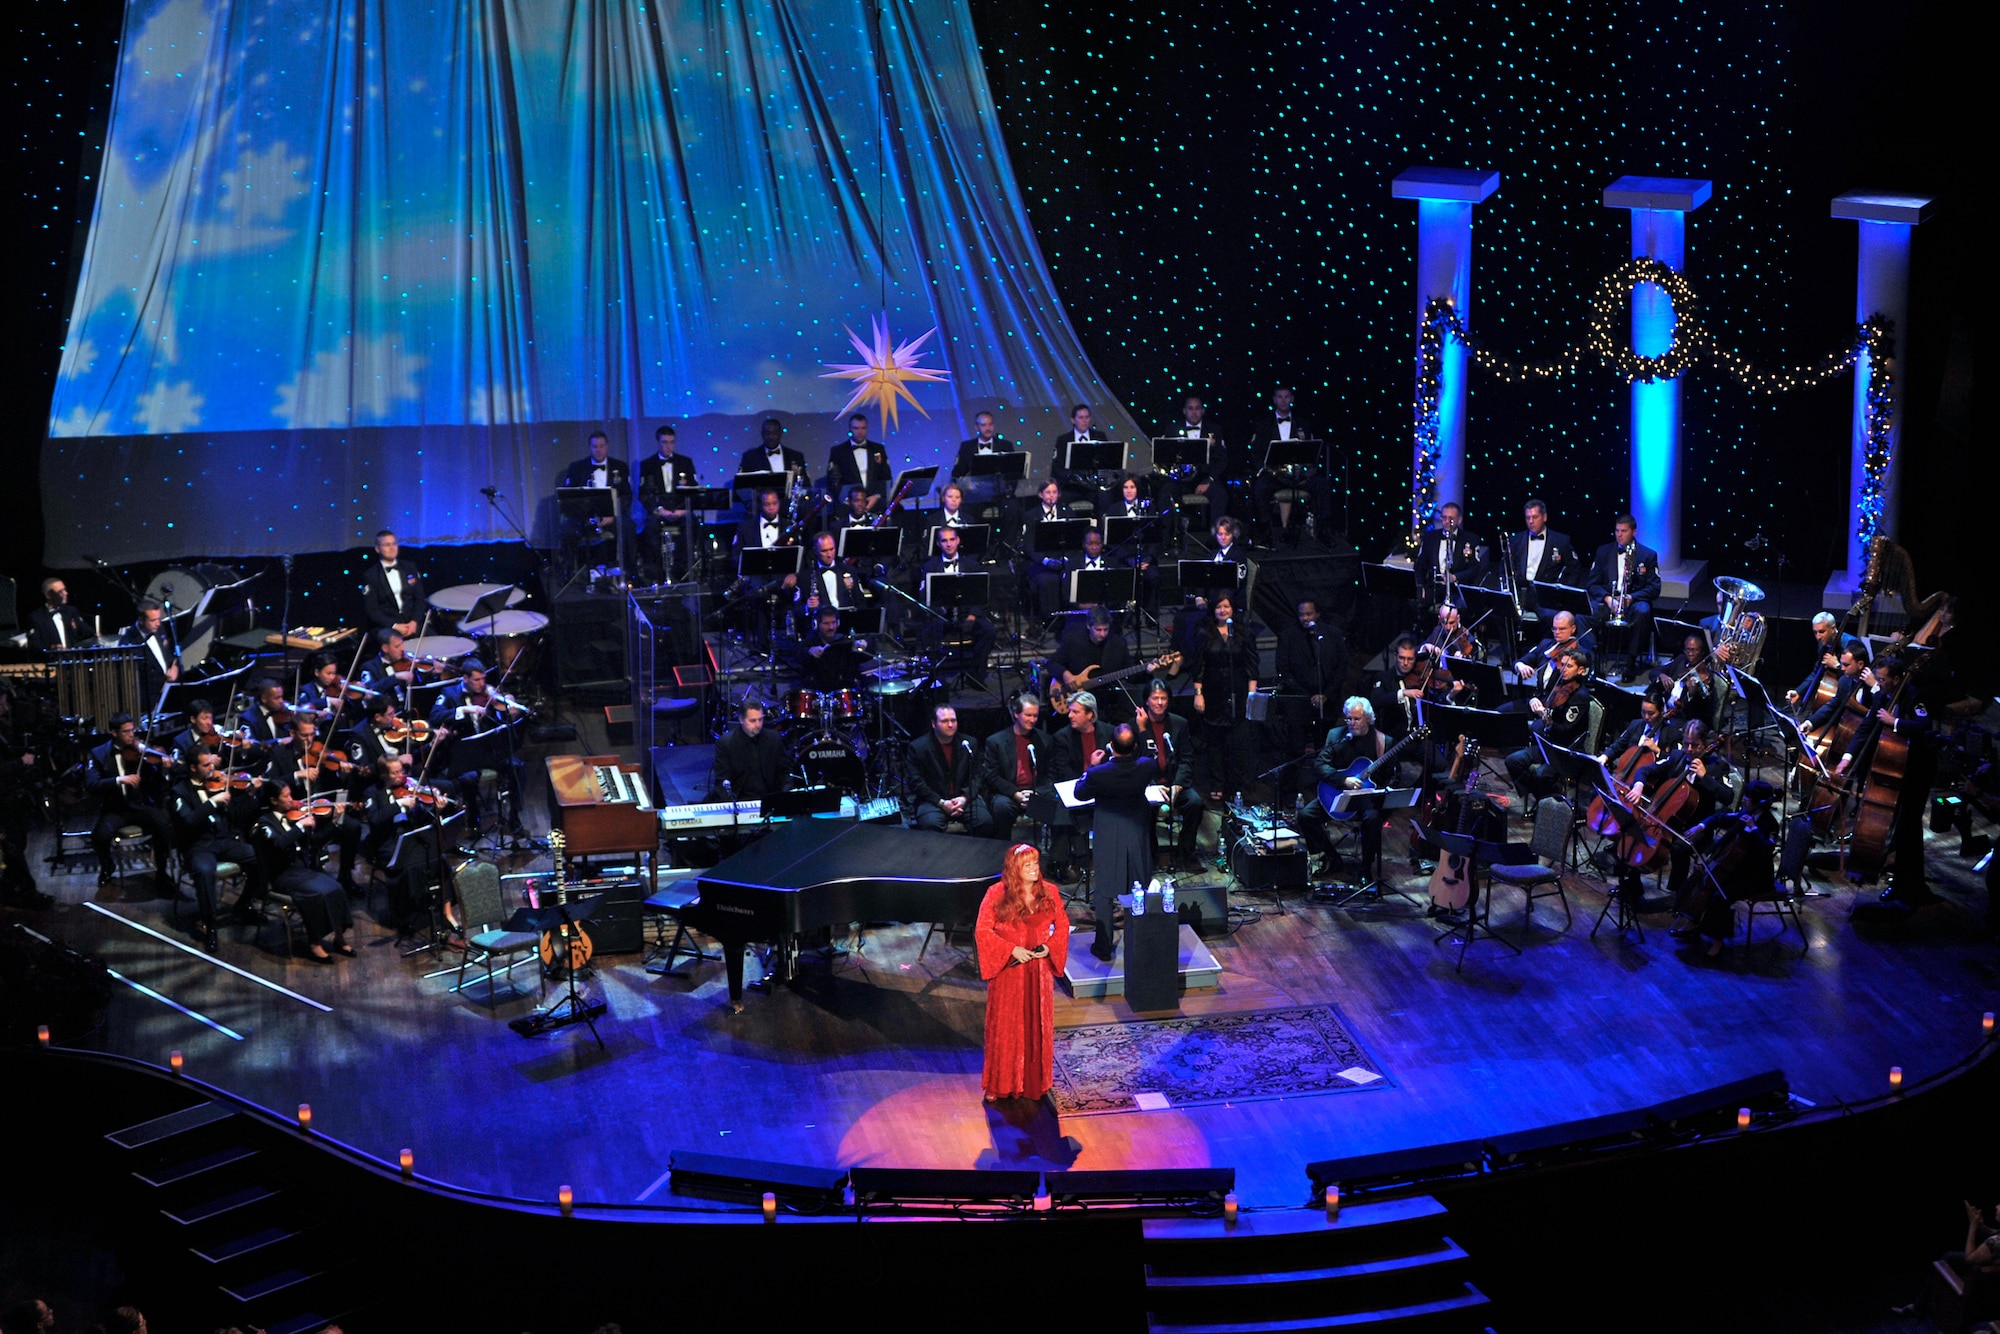 Country music artist Wynonna Judd sings classic holiday music while the Band of the Air Force Reserve and Air Force Strings perform in the background during the 2008 Holiday Notes from Home concert recorded Oct. 6.  Holiday Notes from Home is an annual holiday concert event recorded at the Grand Ole Opry House in Nashville, Tenn., as a tribute to military men and women serving around the world.  The show airs on Great American Country throughout December and also on American Forces Network channels for service members and their families stationed overseas.  (U.S. Air Force photo/Ken Hackman)